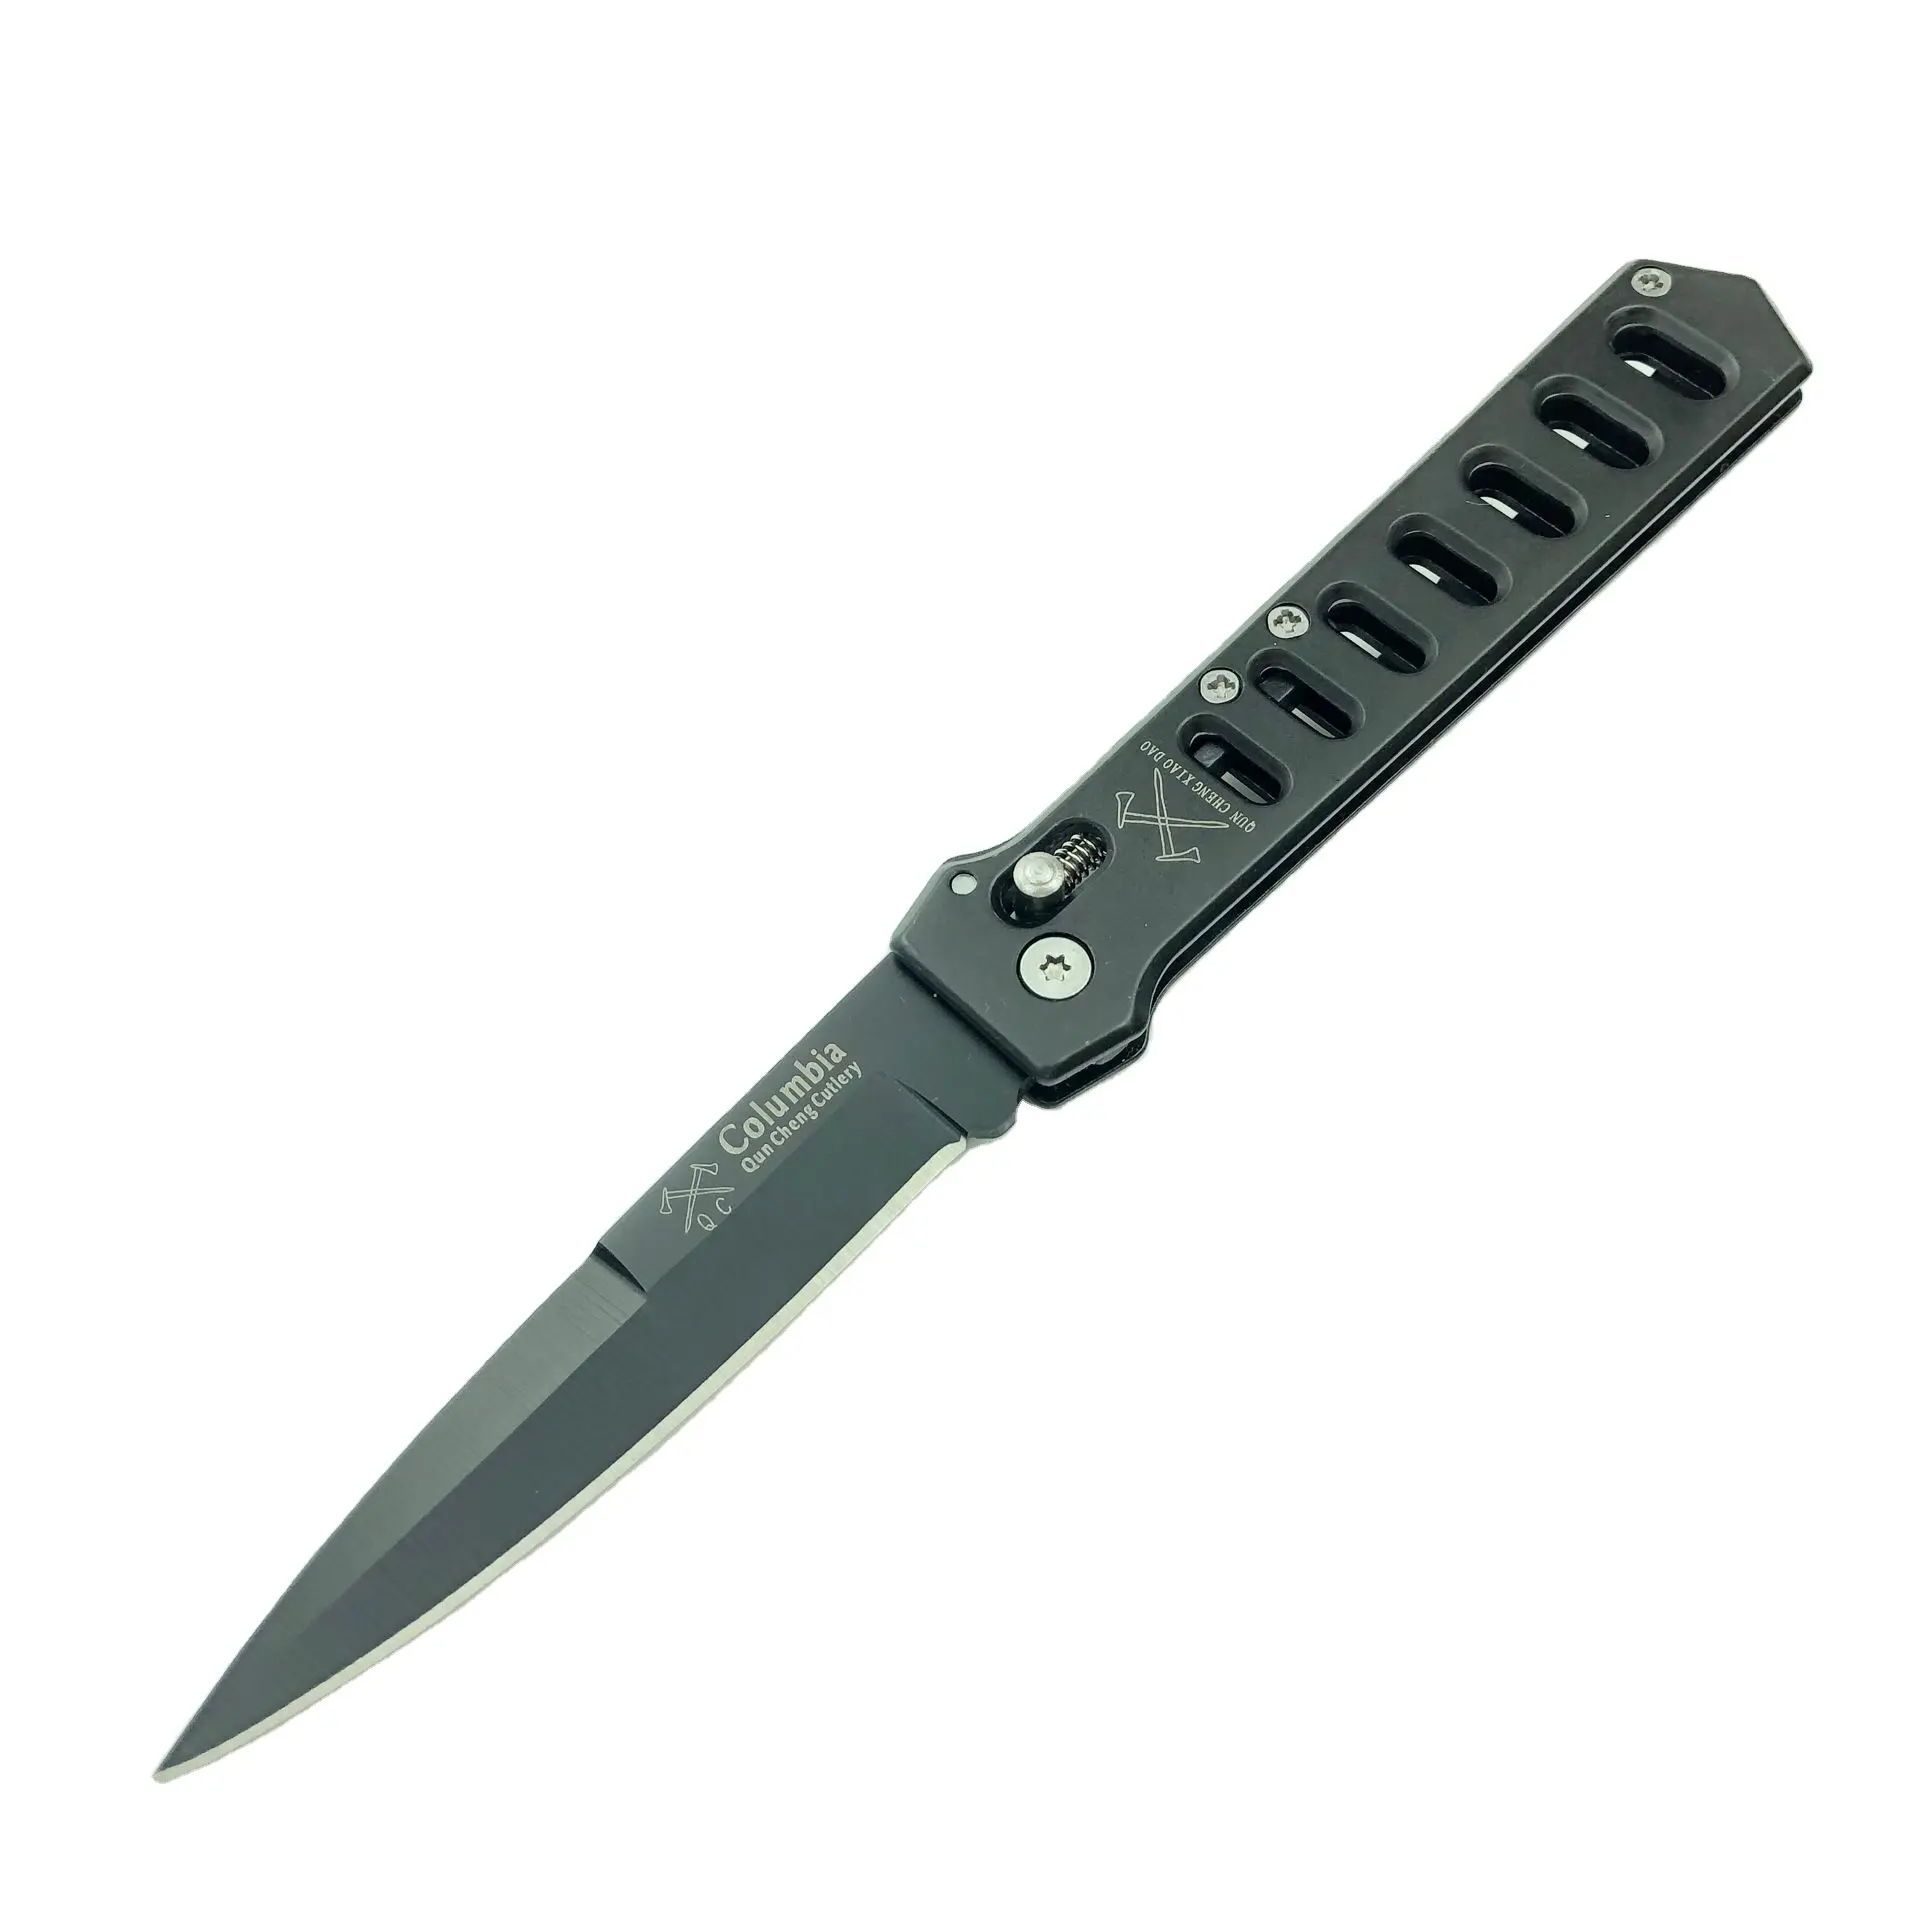 Columbia knives all steel handle tactical folding knife camping pocket Knife at a reasonable price